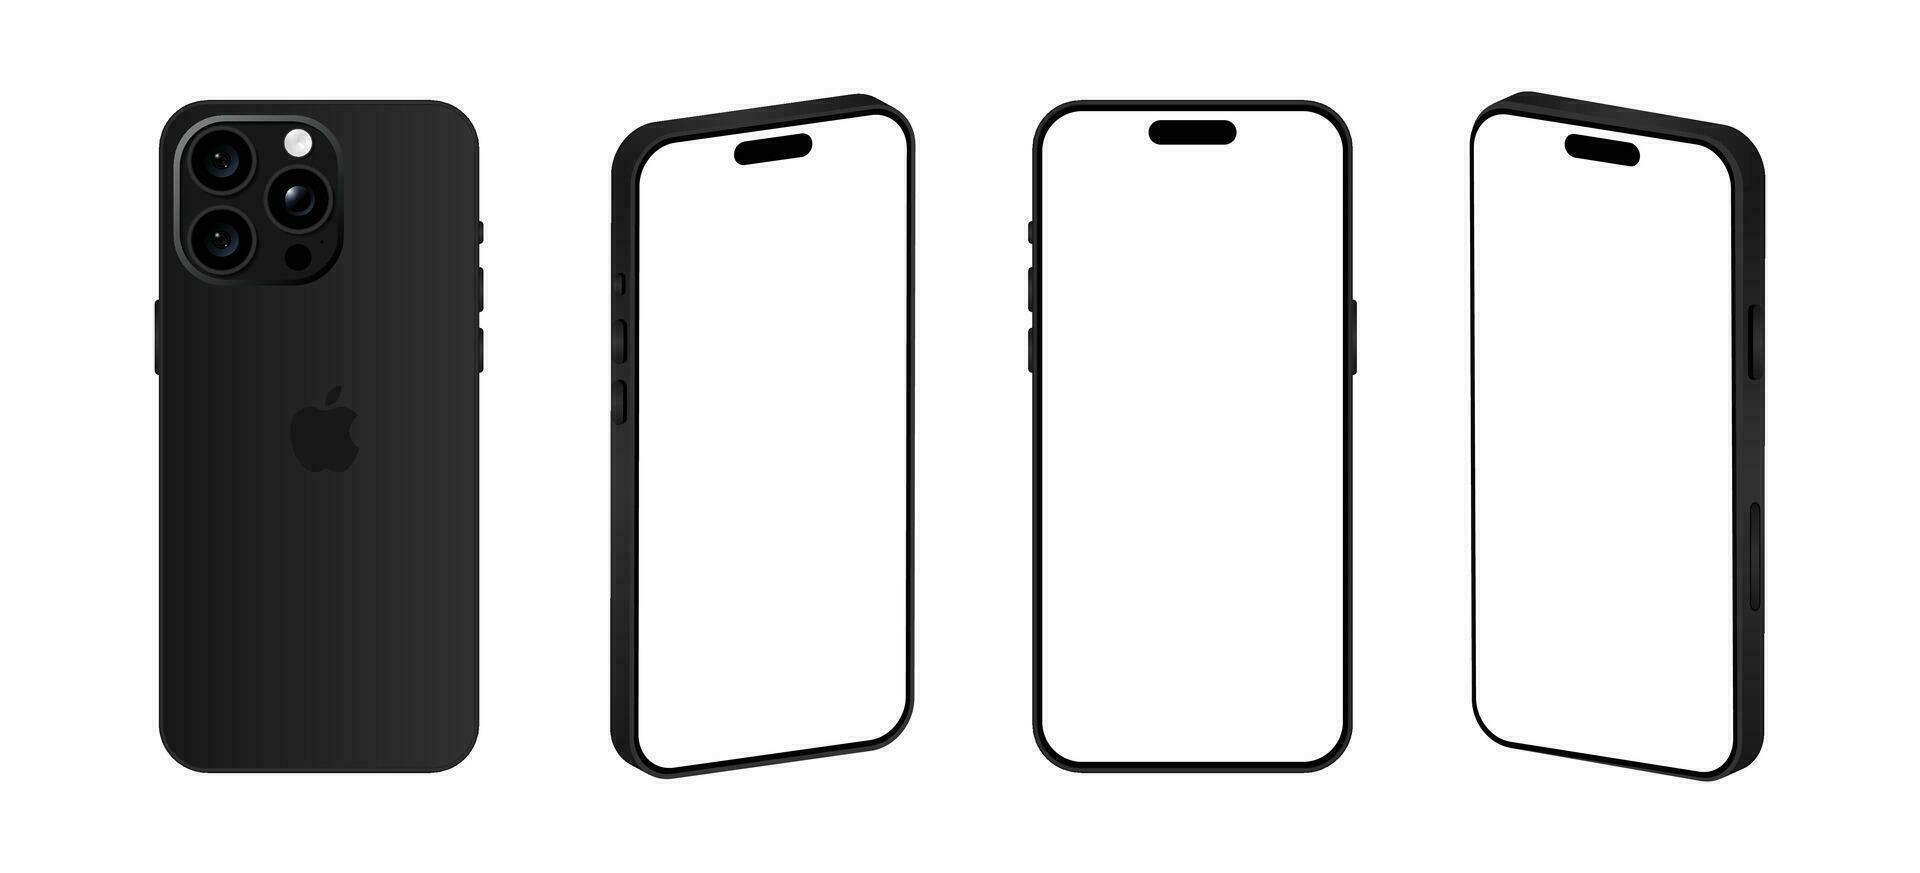 Iphone 15 Pro model. Black titanium color. Front view, back view and different view. Vector mockup. Vector illustration